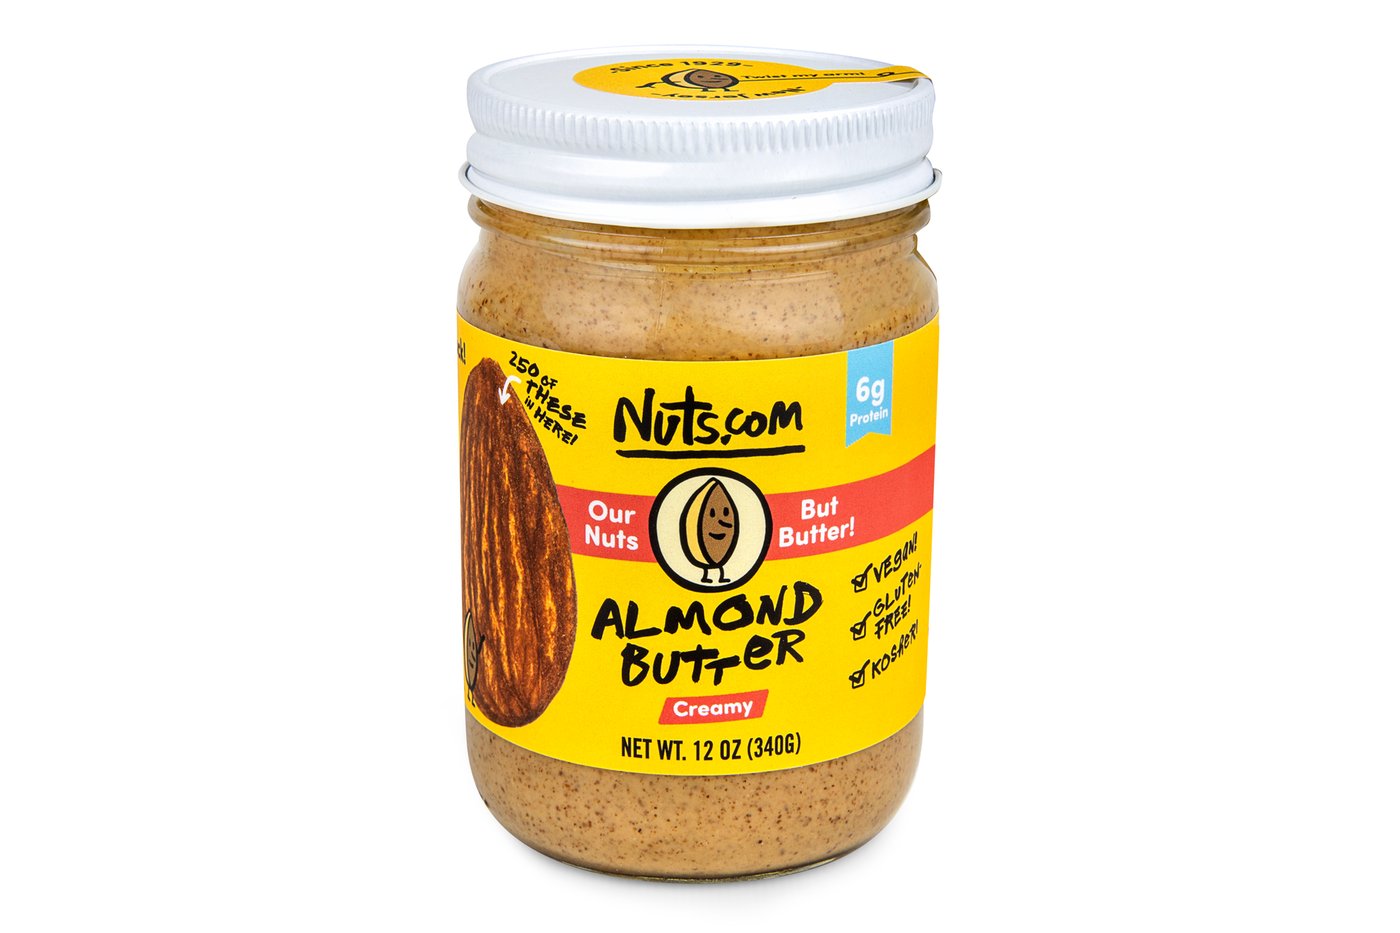 Almond Butter (Roasted, Smooth) photo